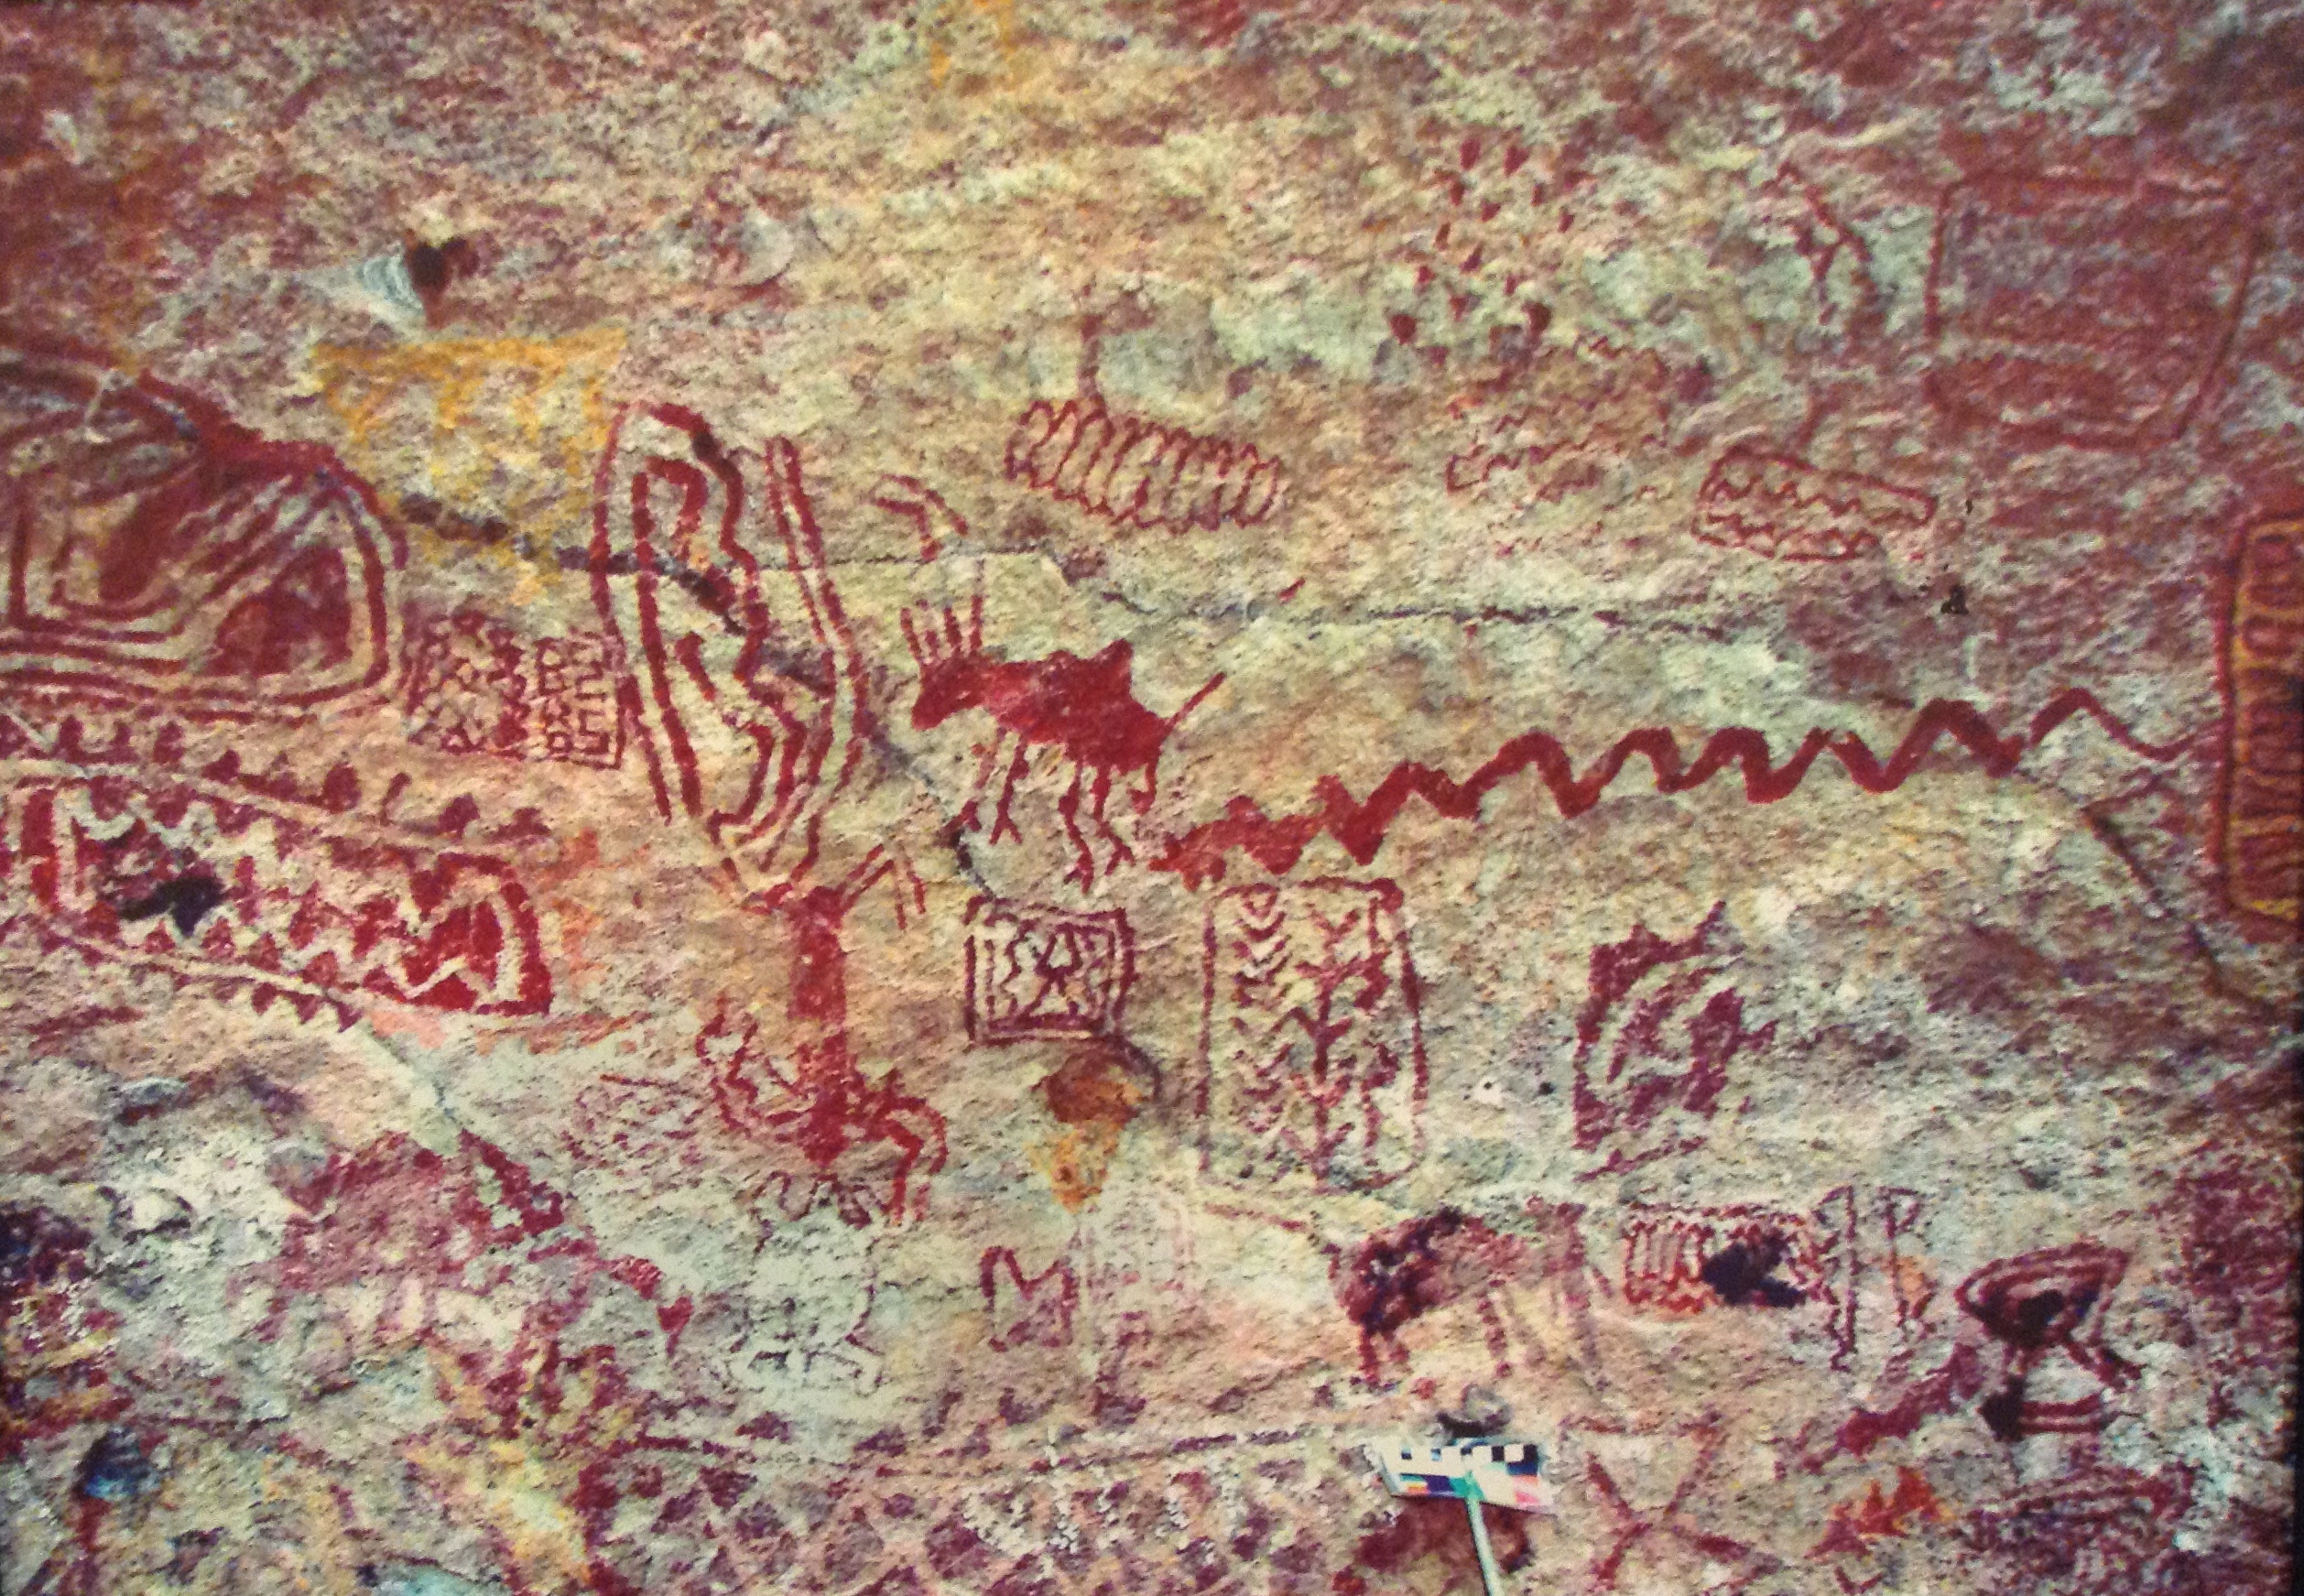 Rock art from Central India